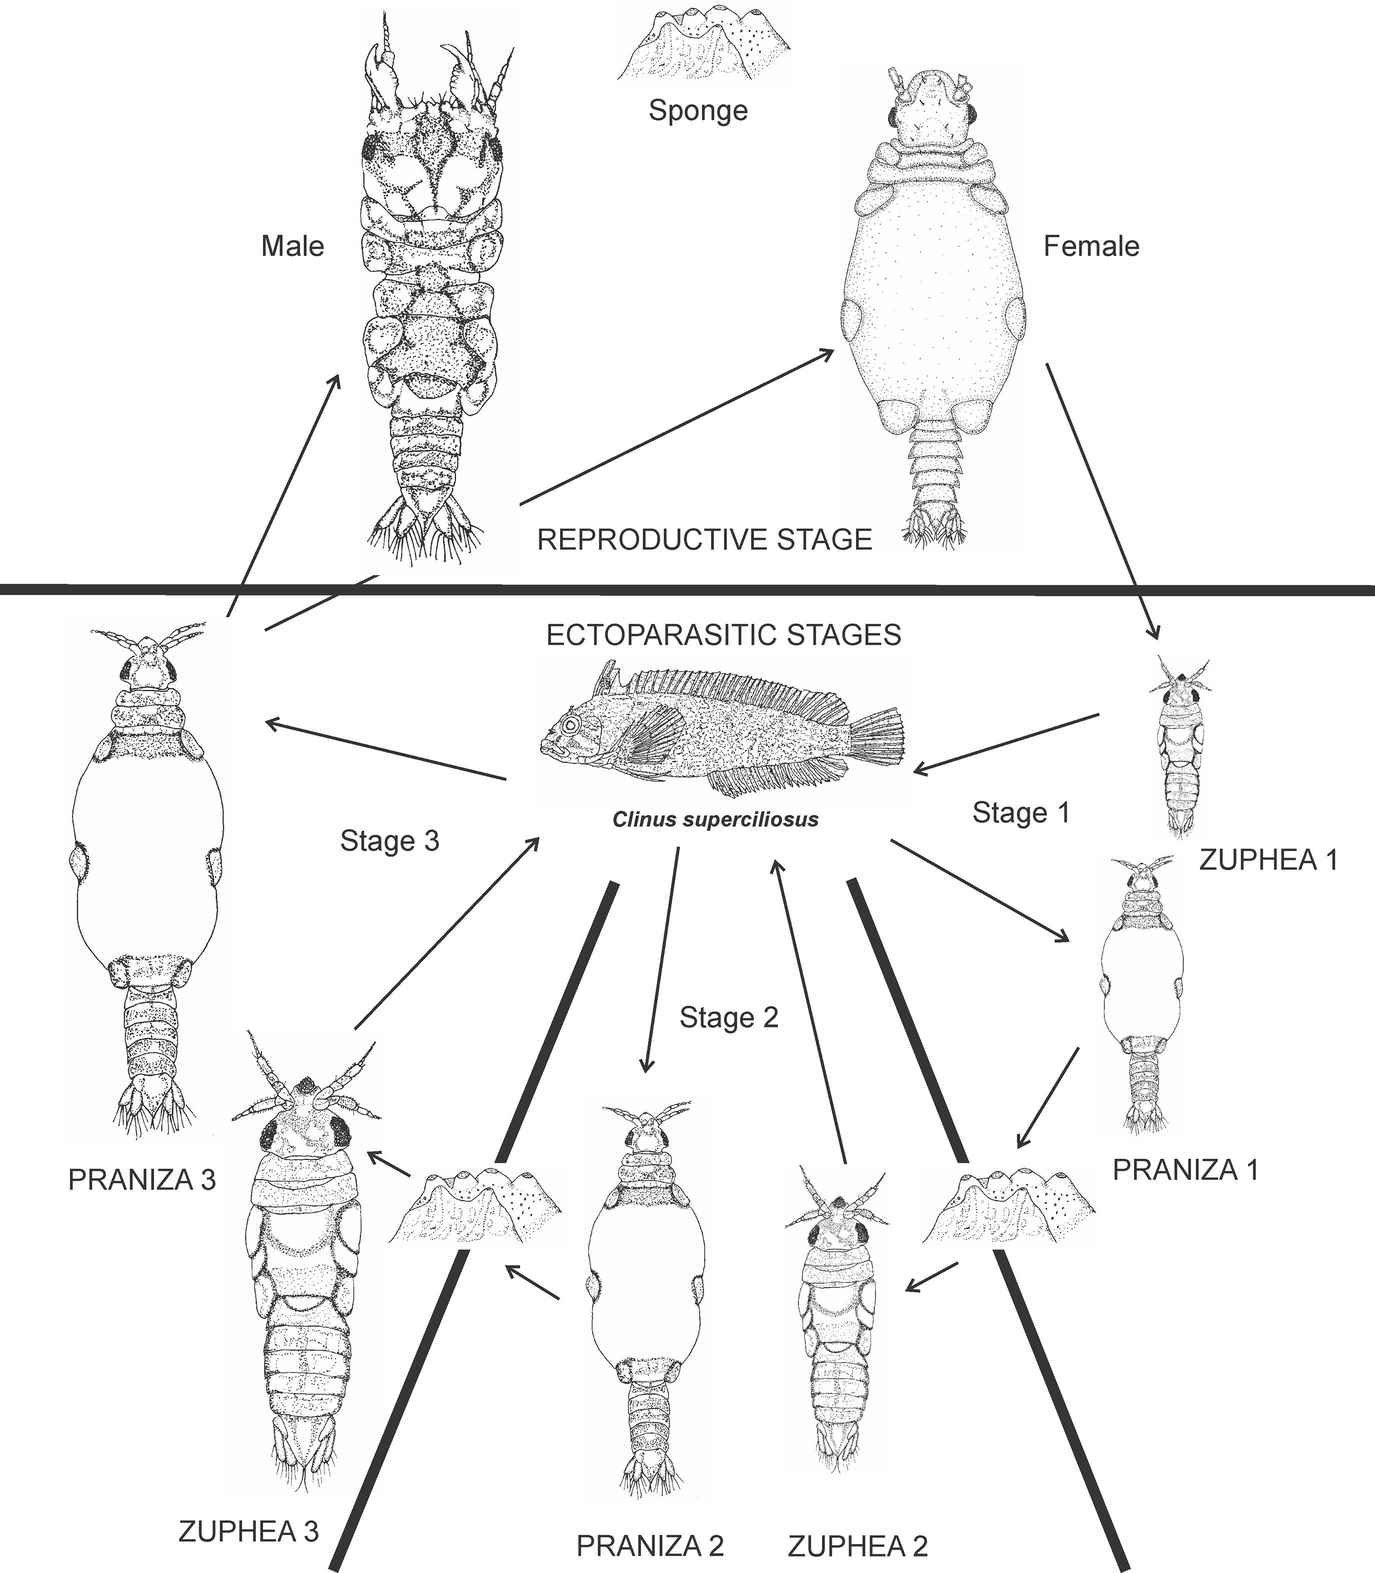 Life Cycle And Life History Strategies Of Parasitic Crustacea Springerlink